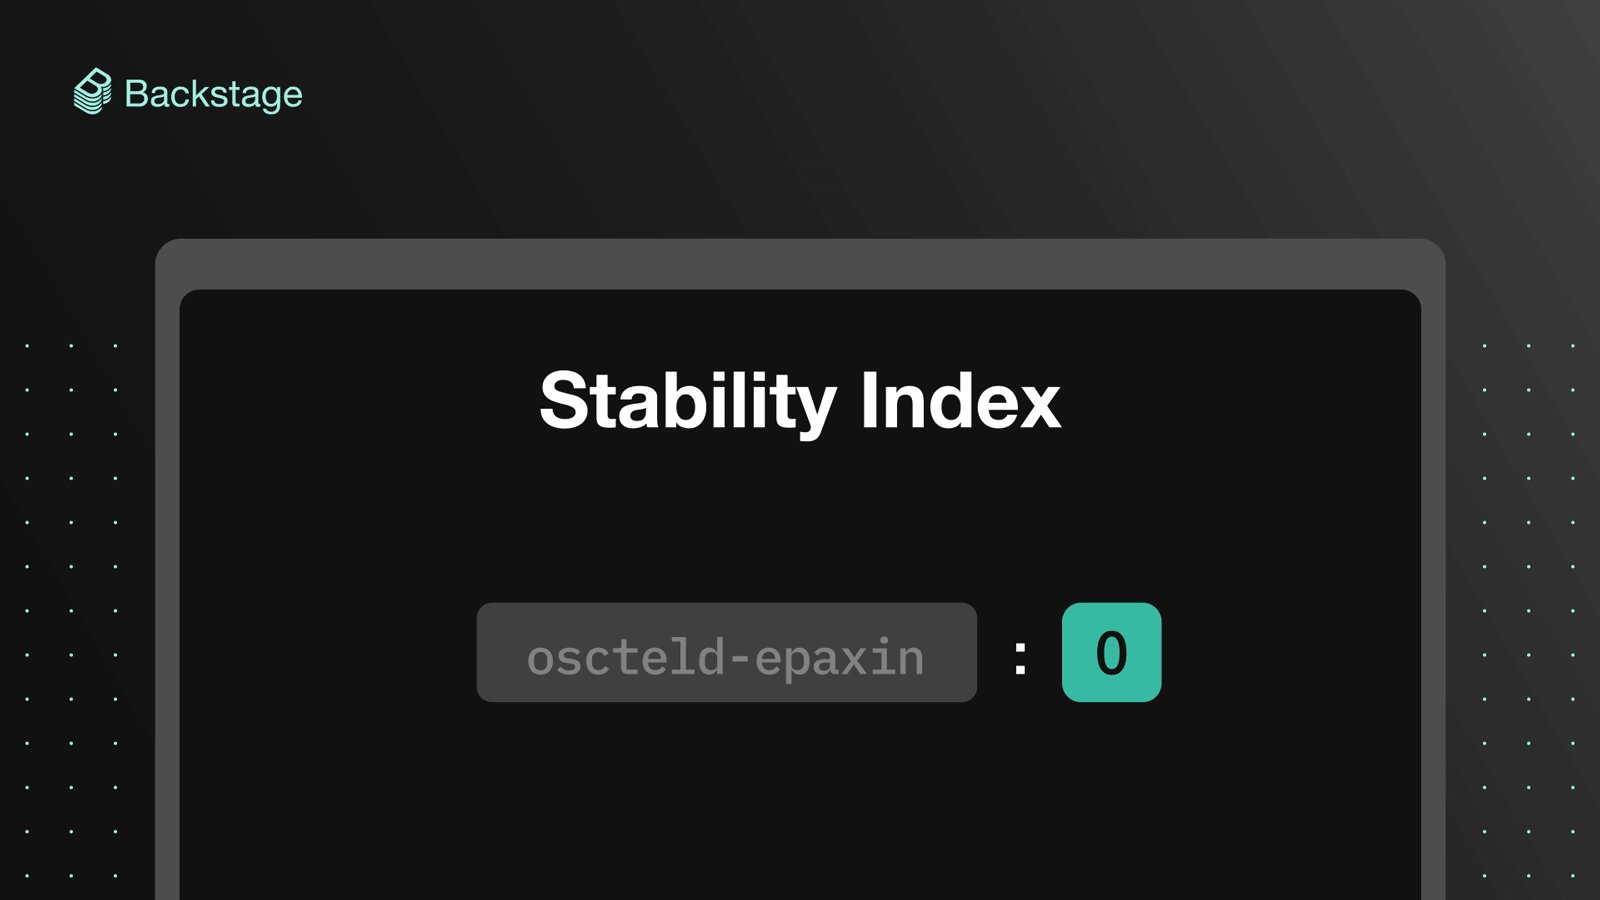 Animation cycling between stability index scores